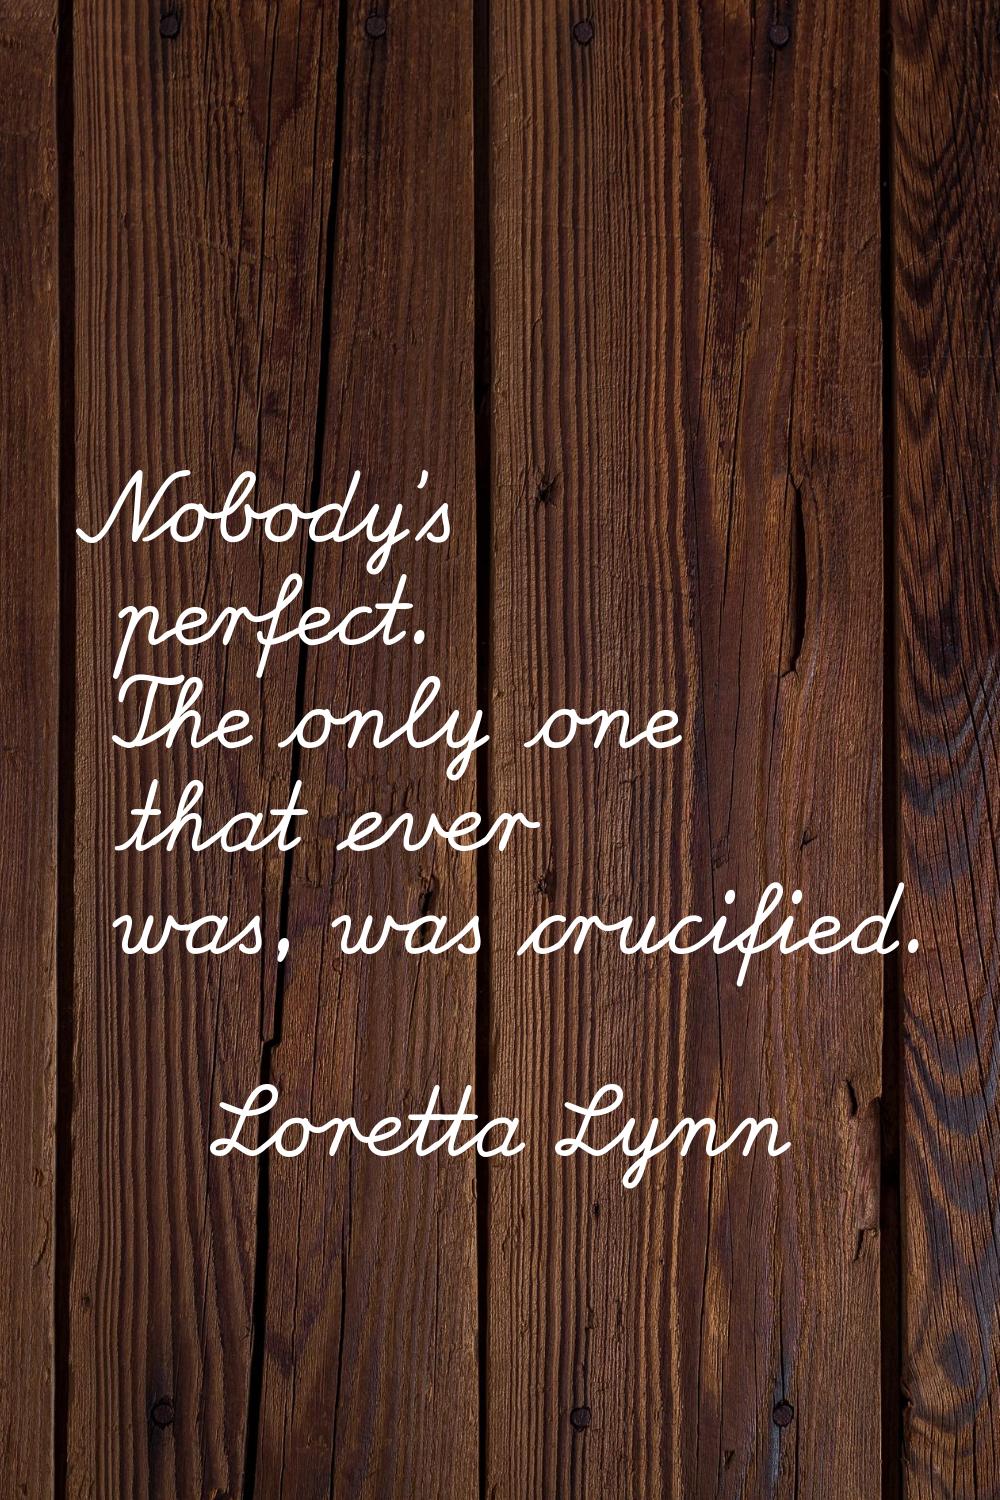 Nobody's perfect. The only one that ever was, was crucified.